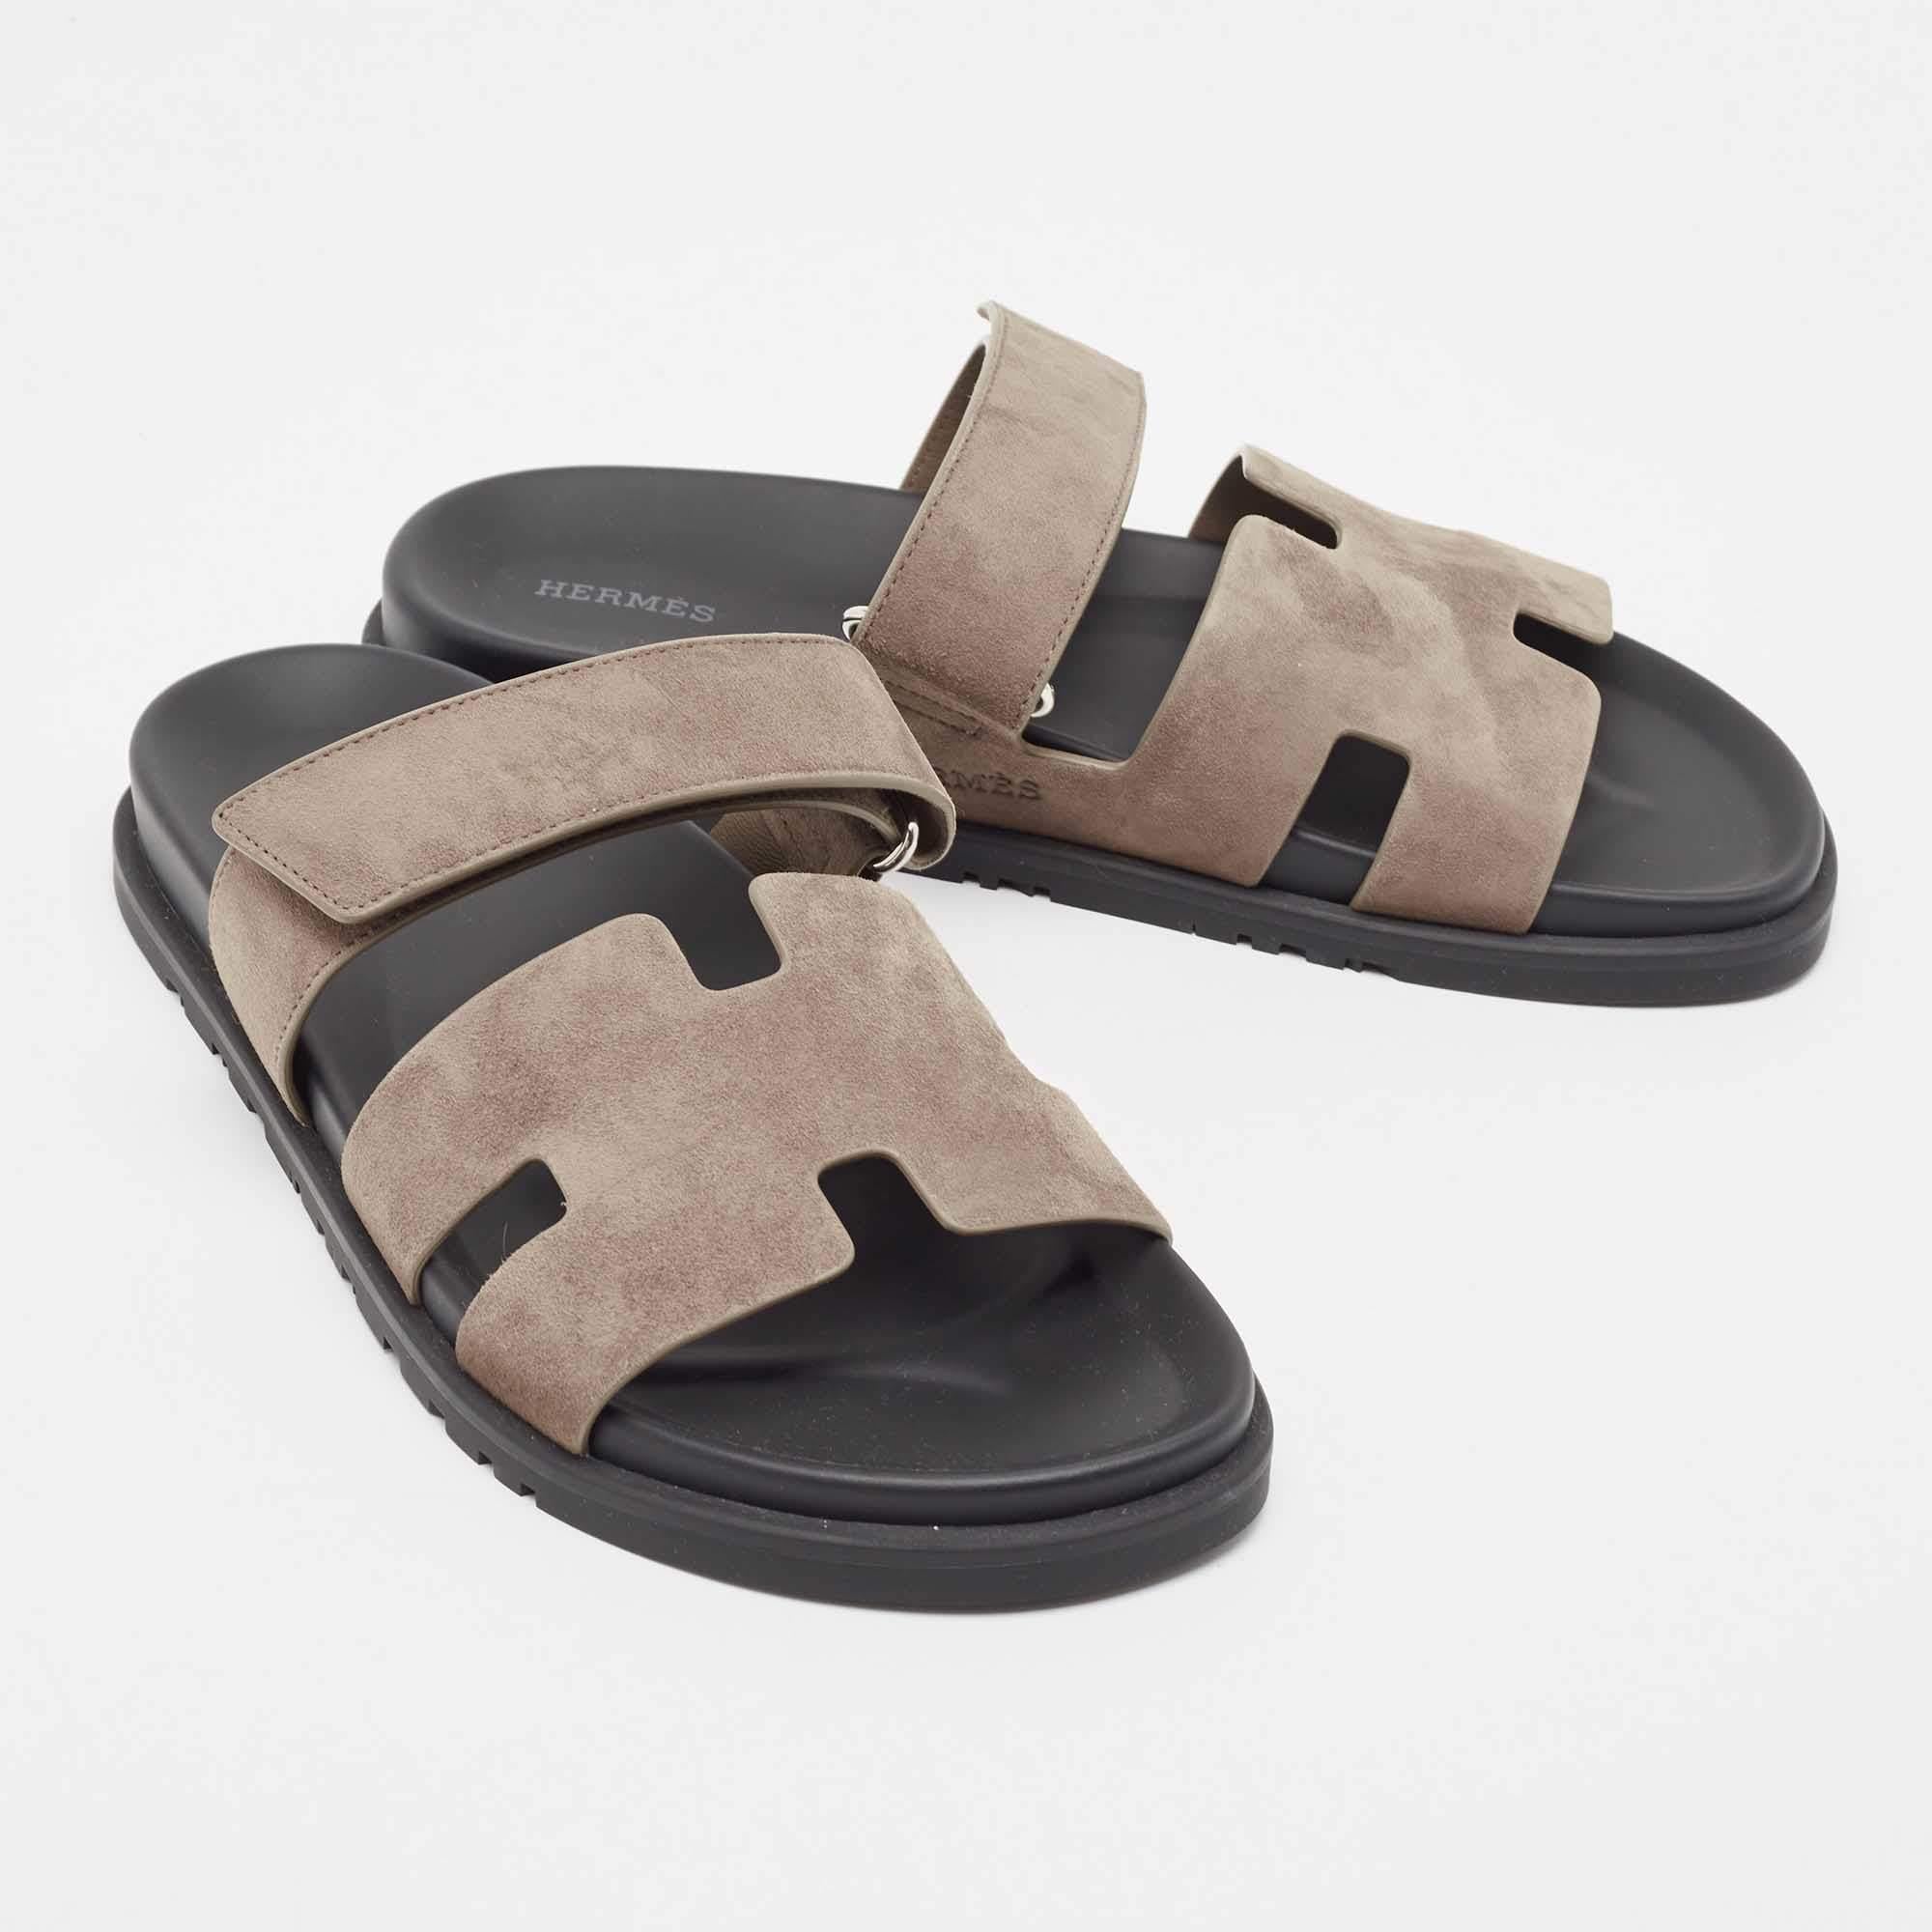 Hermes Grey Suede Chypre Sandals Size 42.5 1